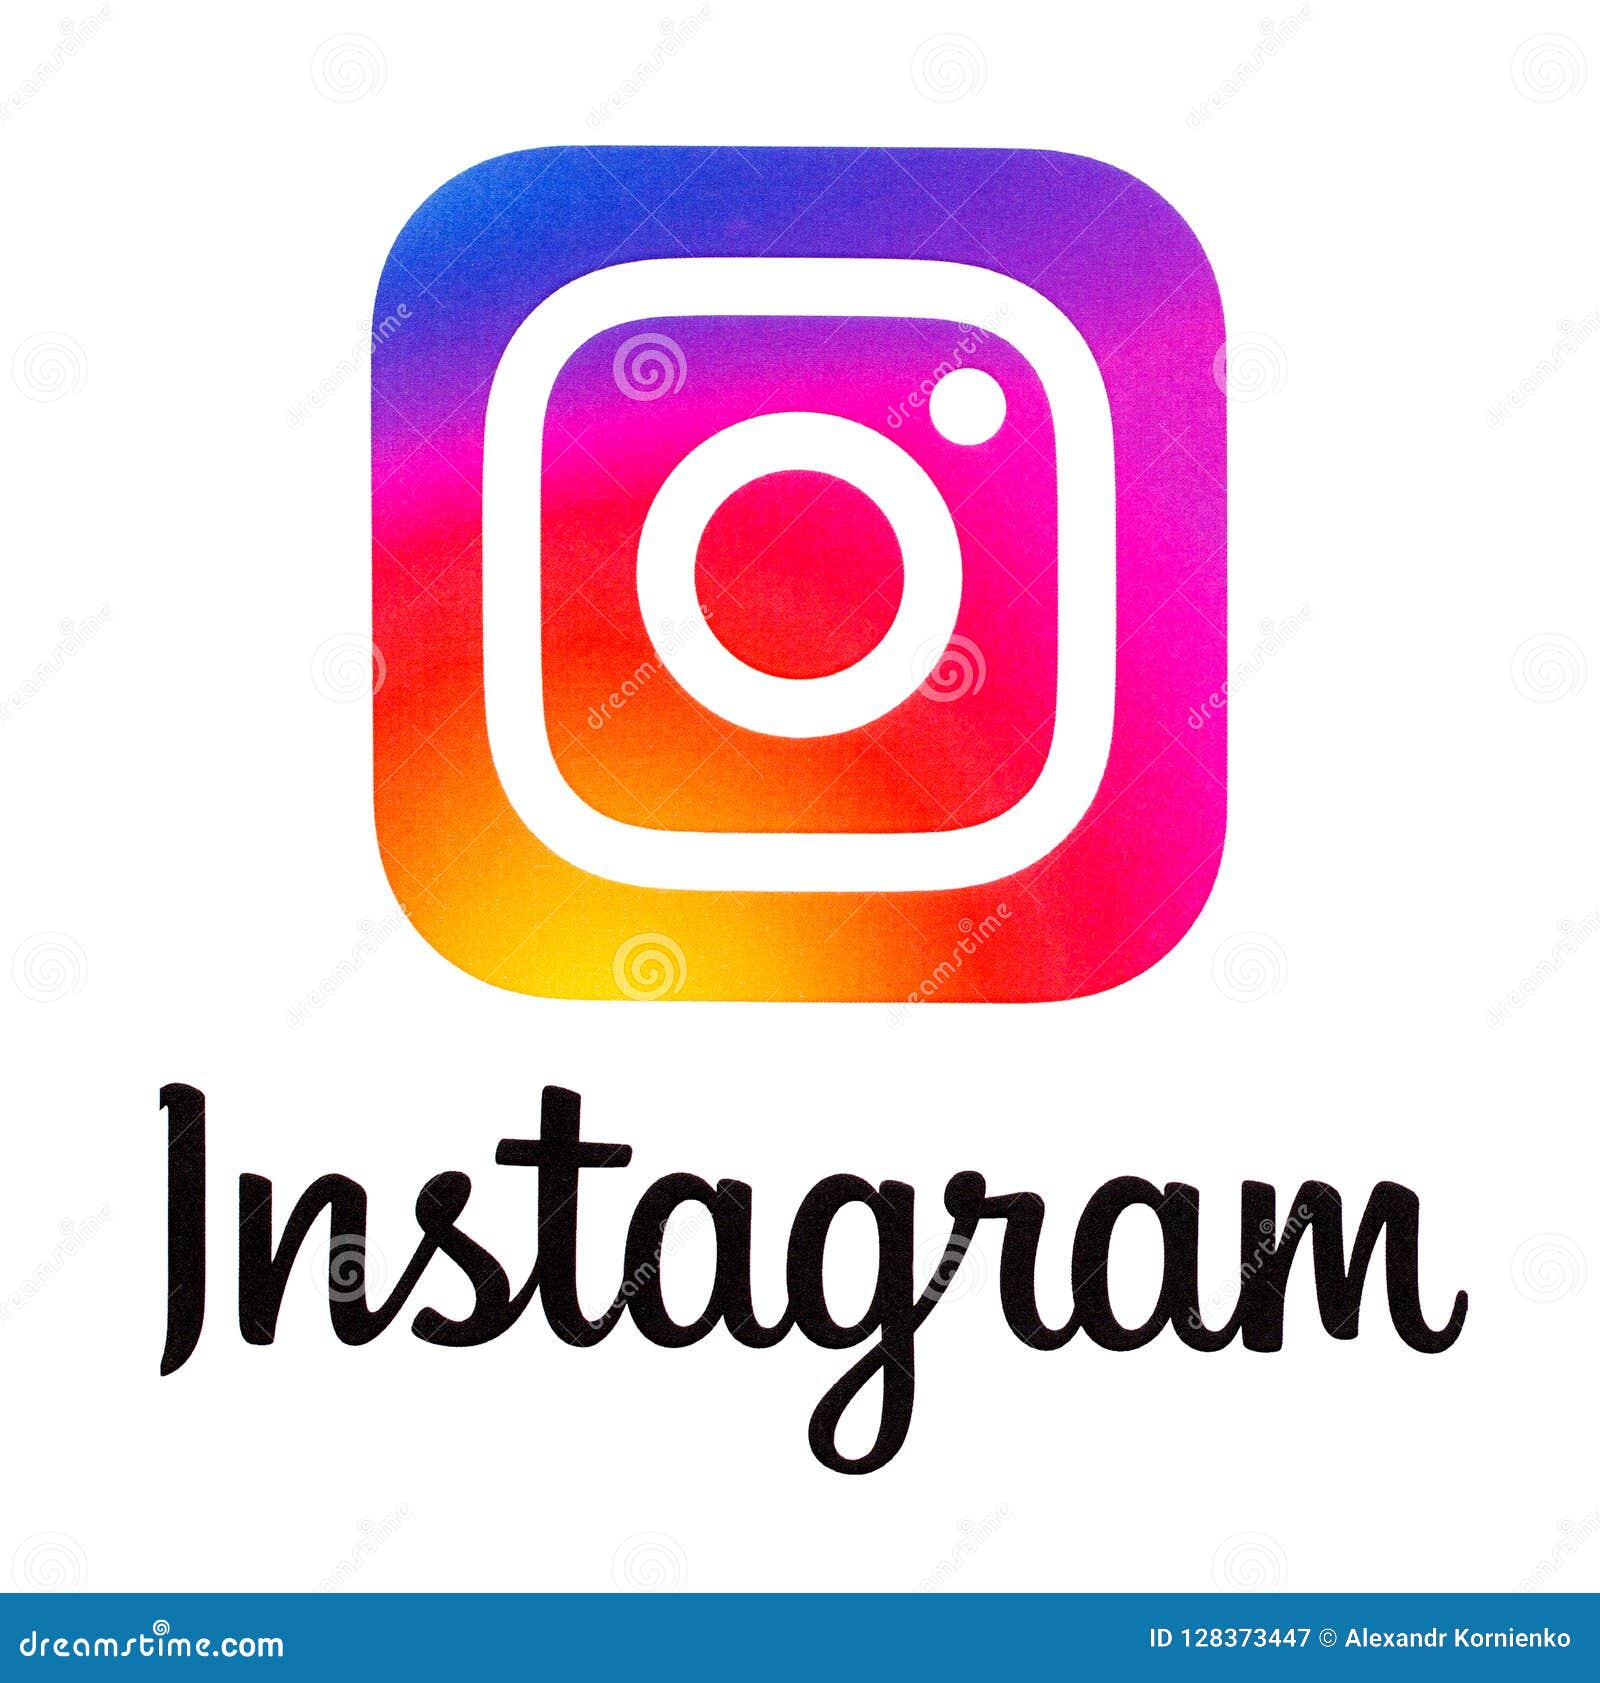 6 159 Instagram Logo Photos Free Royalty Free Stock Photos From Dreamstime